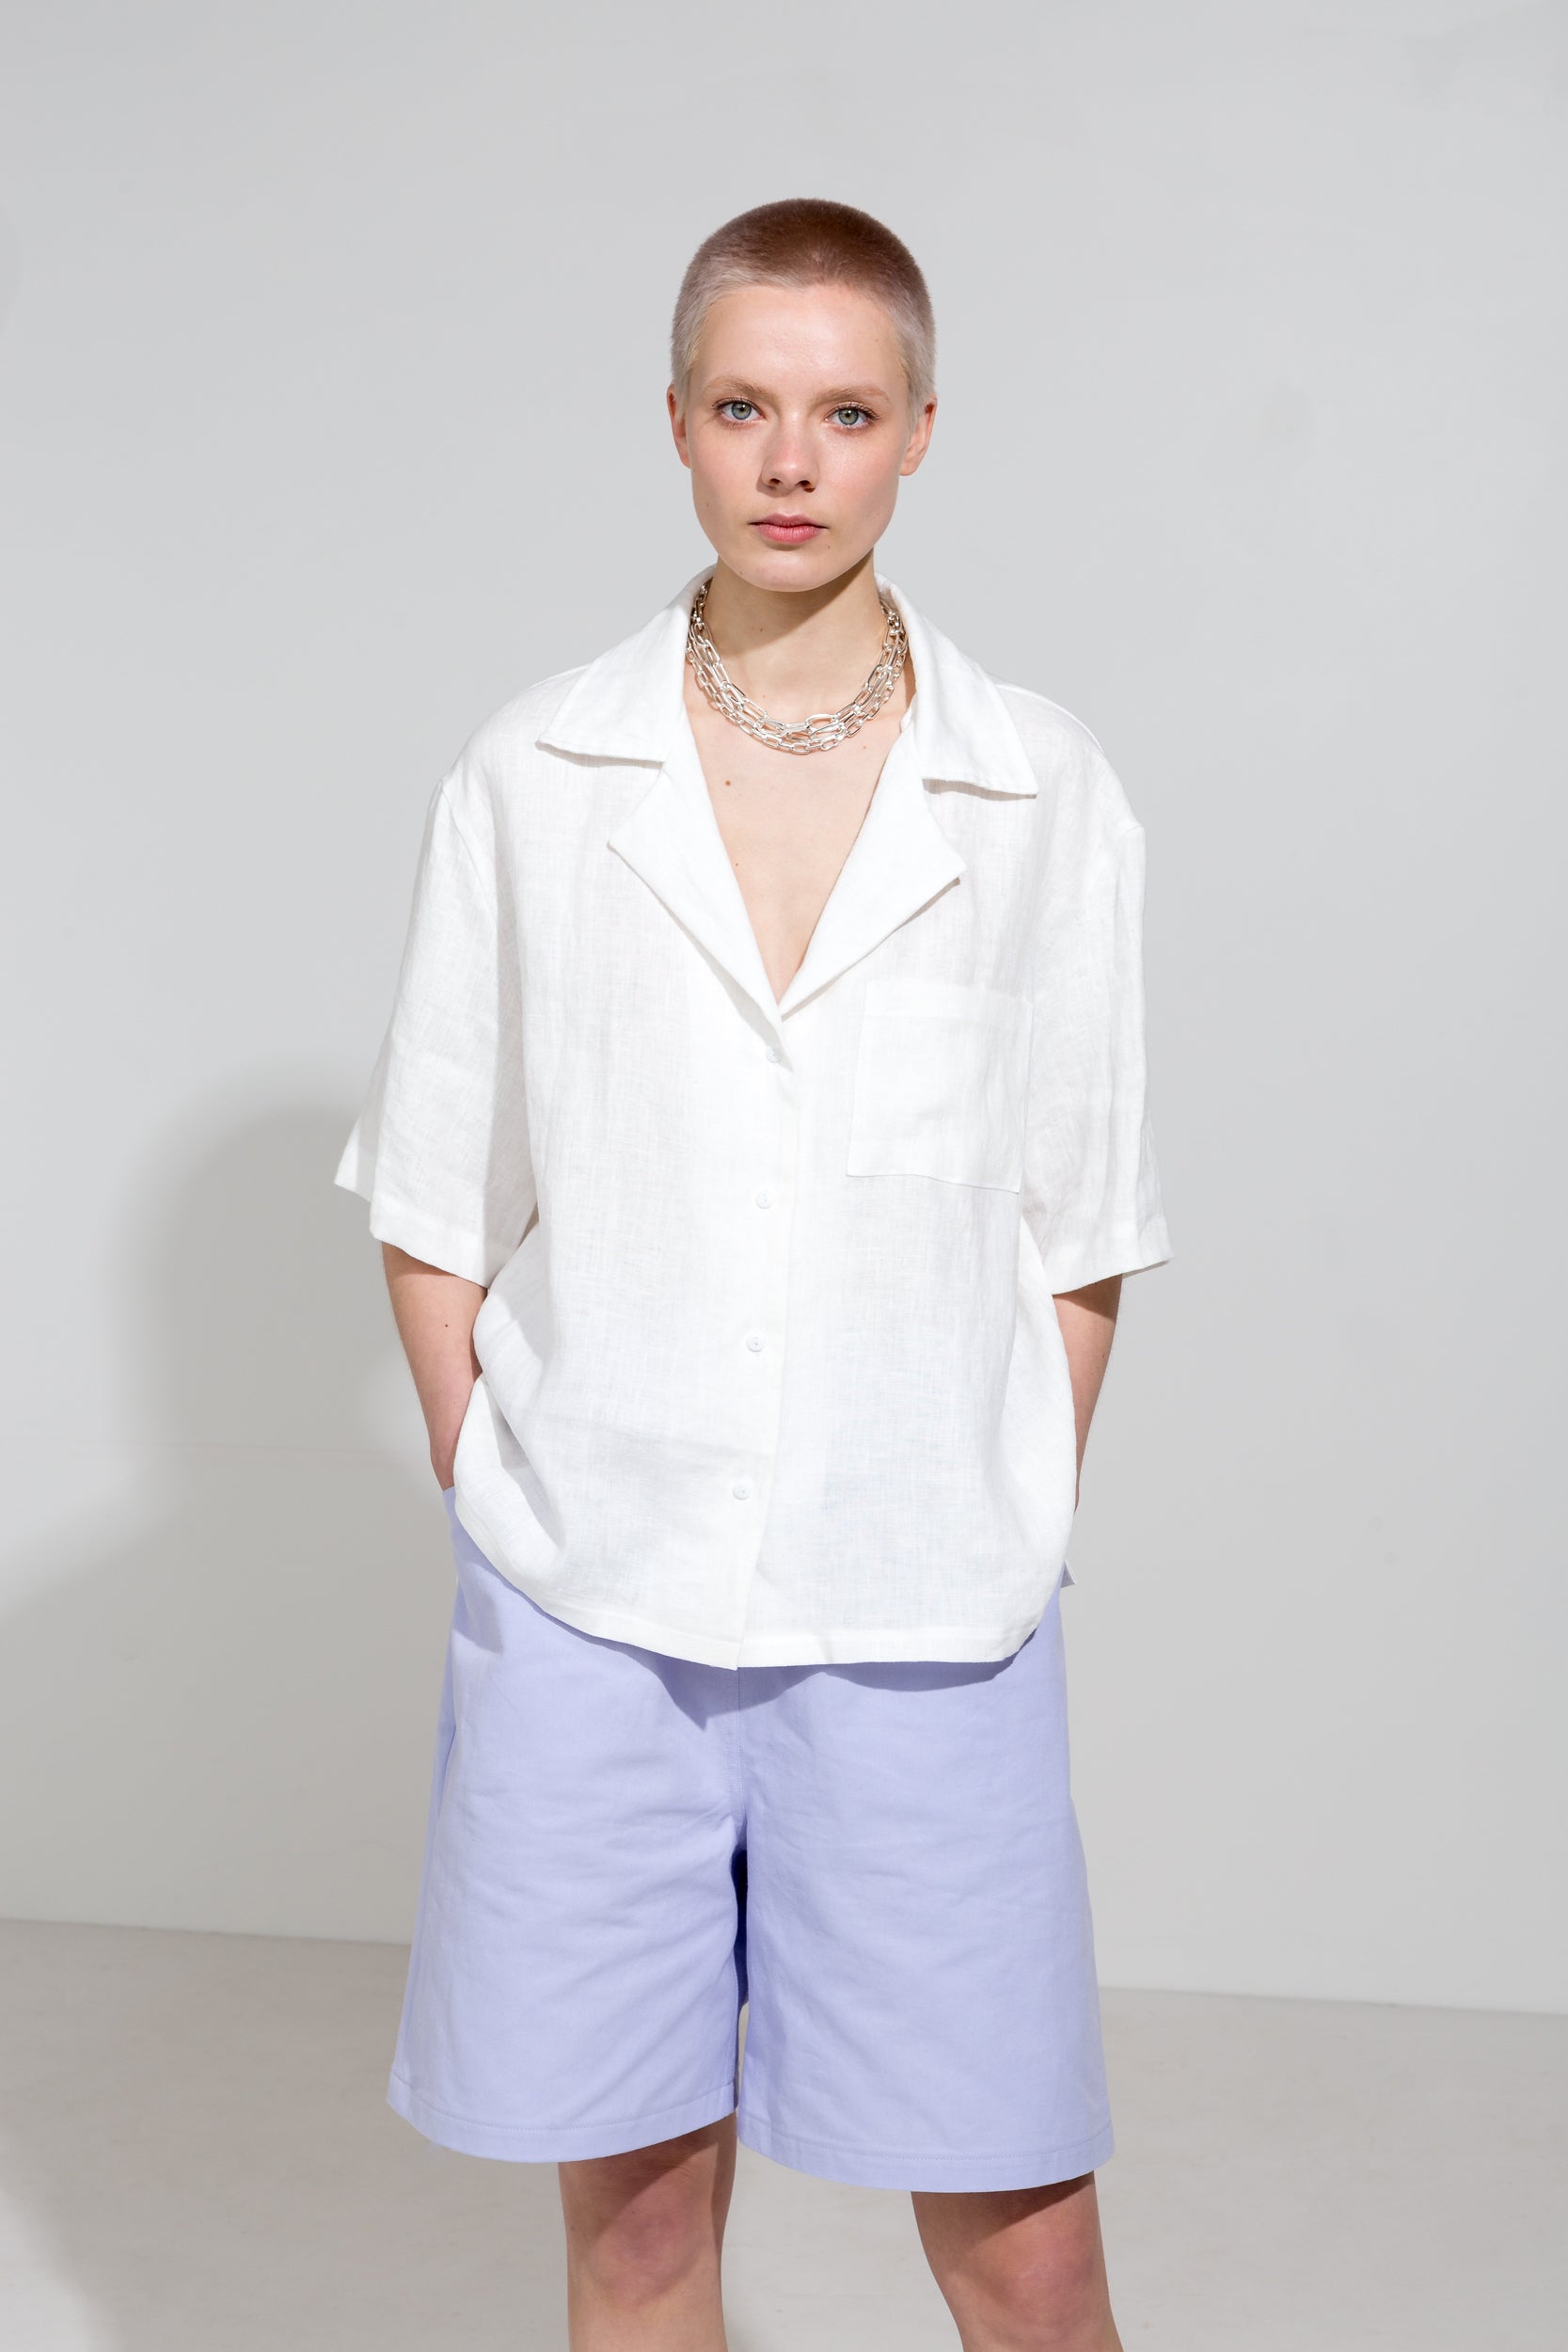 Relaxed fit twill shorts and white linen shirt with open collar